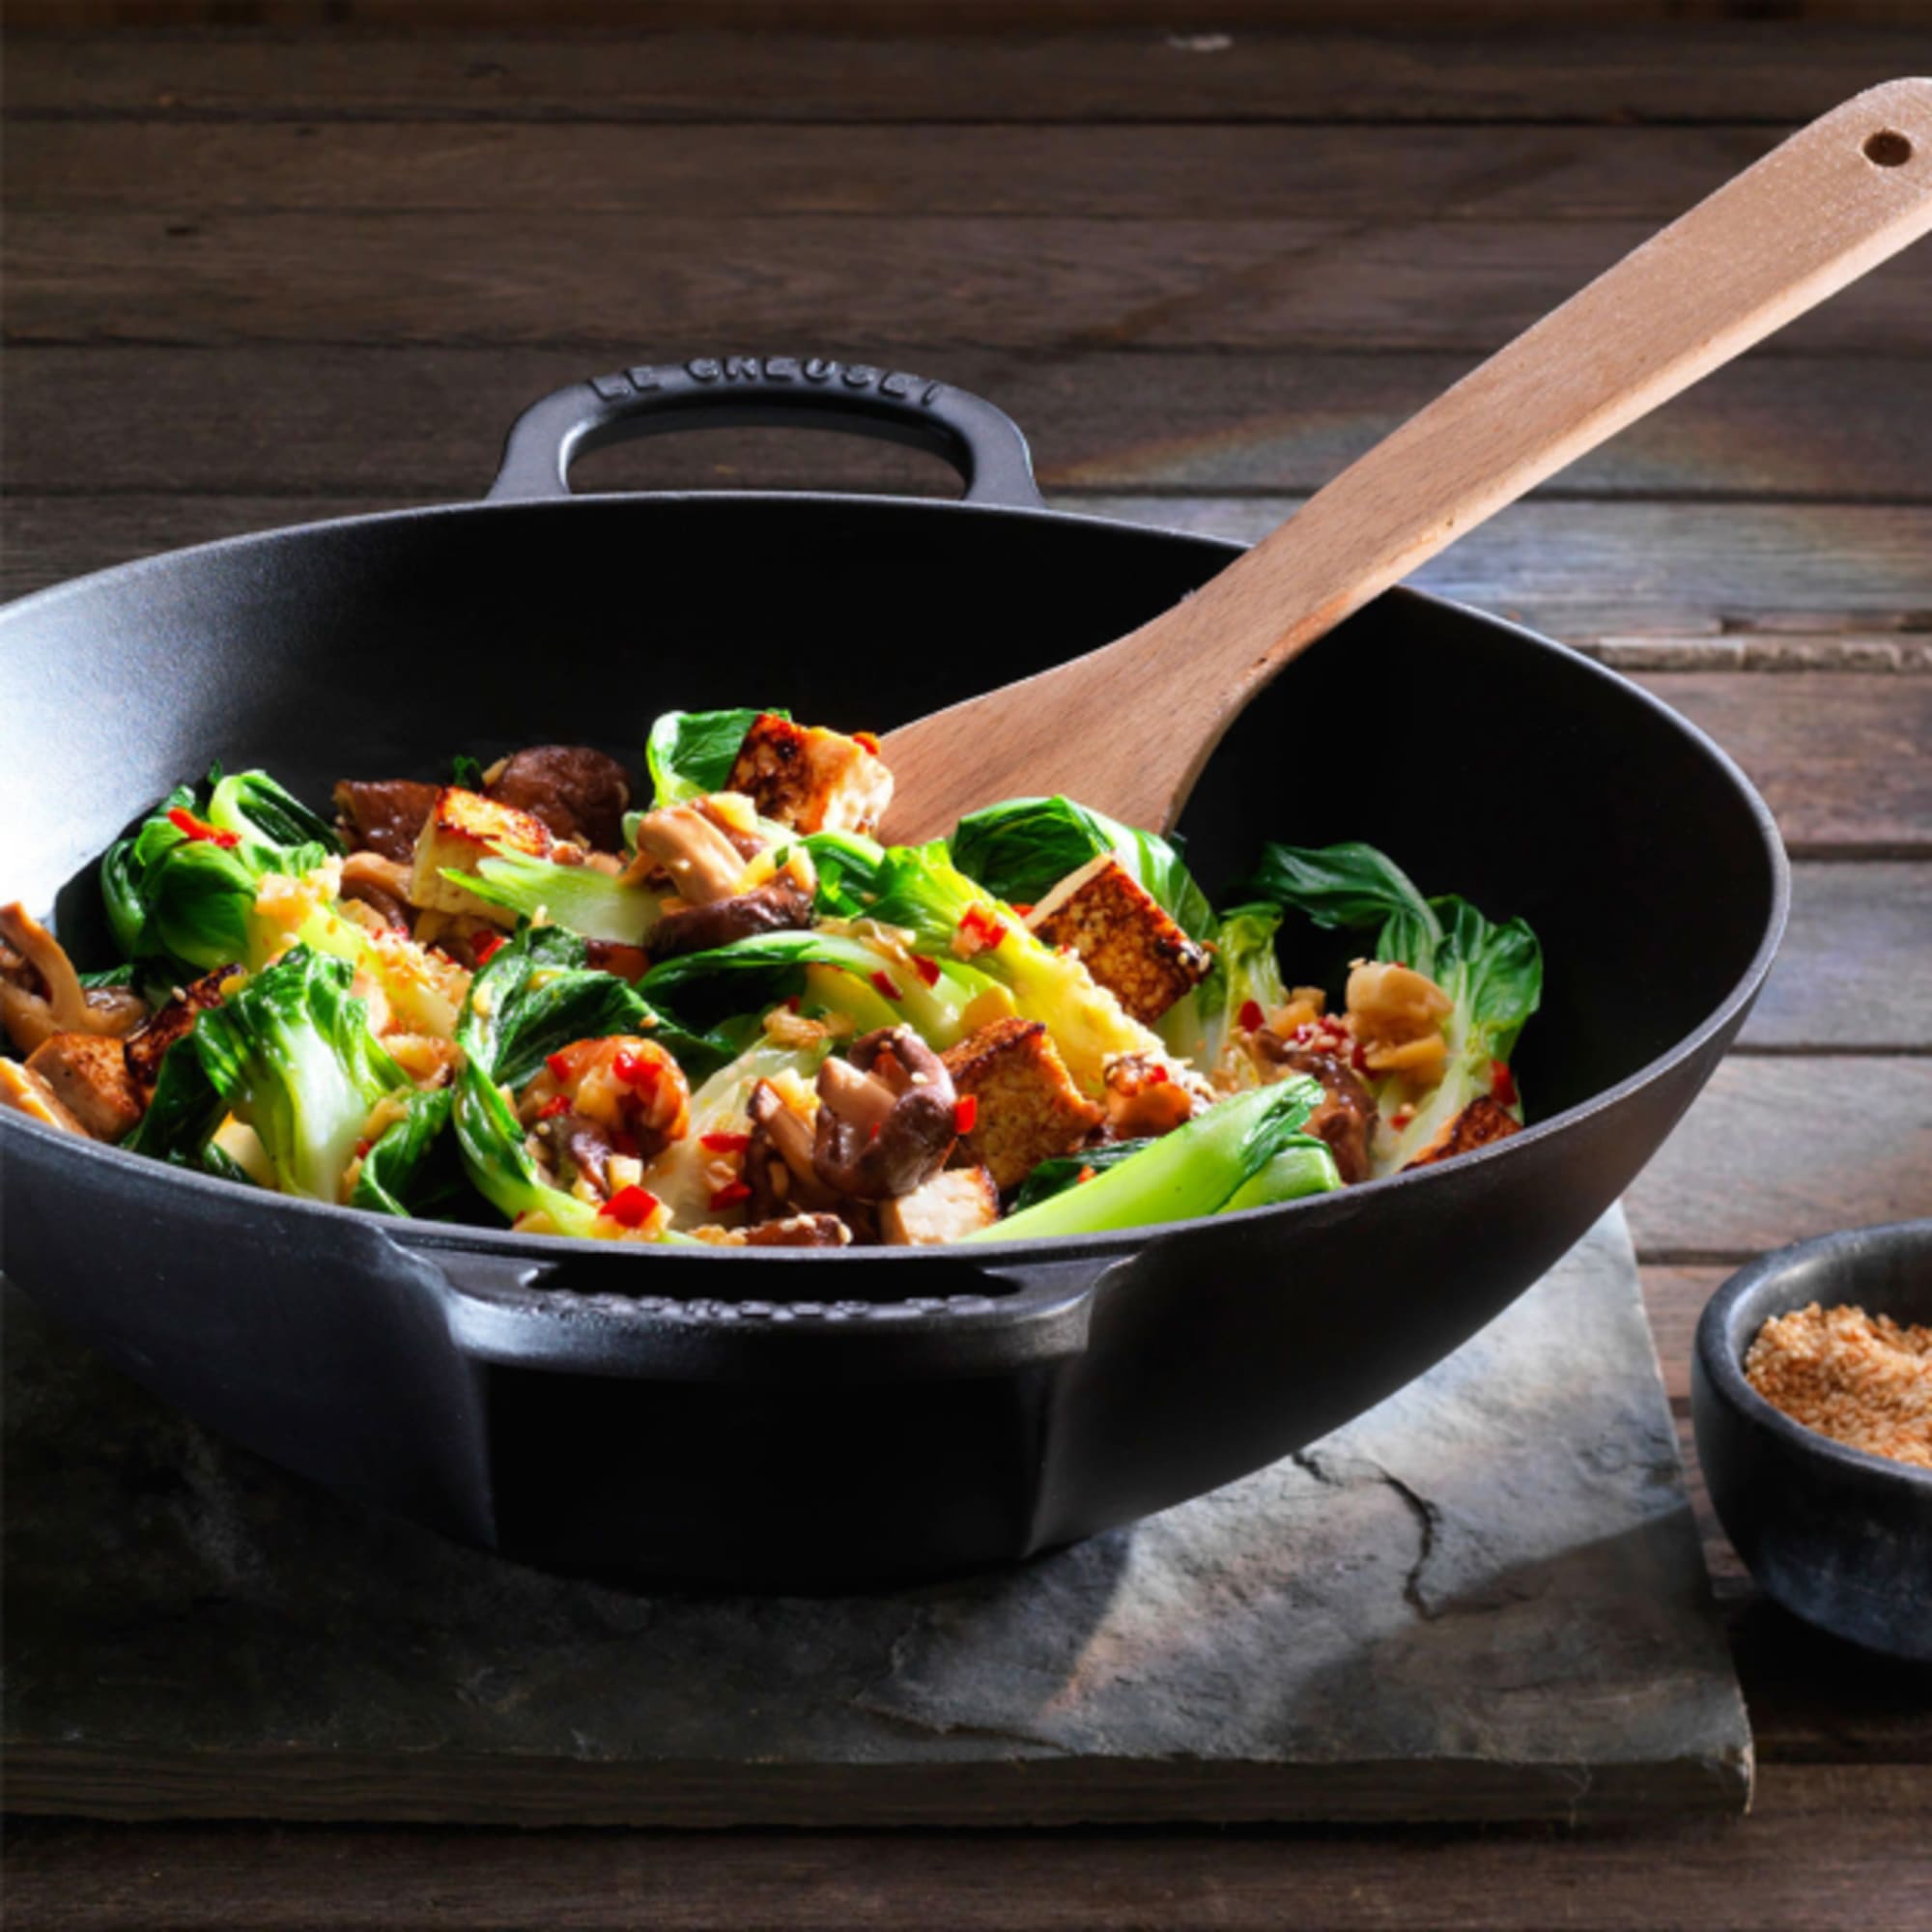 https://res.cloudinary.com/kitchenwarehouse/image/upload/c_fill,g_face,w_625/f_auto/t_PDP_2000x2000/Supplier%20Images%20/2000px/Le-Creuset-Cast-Iron-Wok-with-Glass-Lid-32cm-Satin-Black_2_2000px.jpg